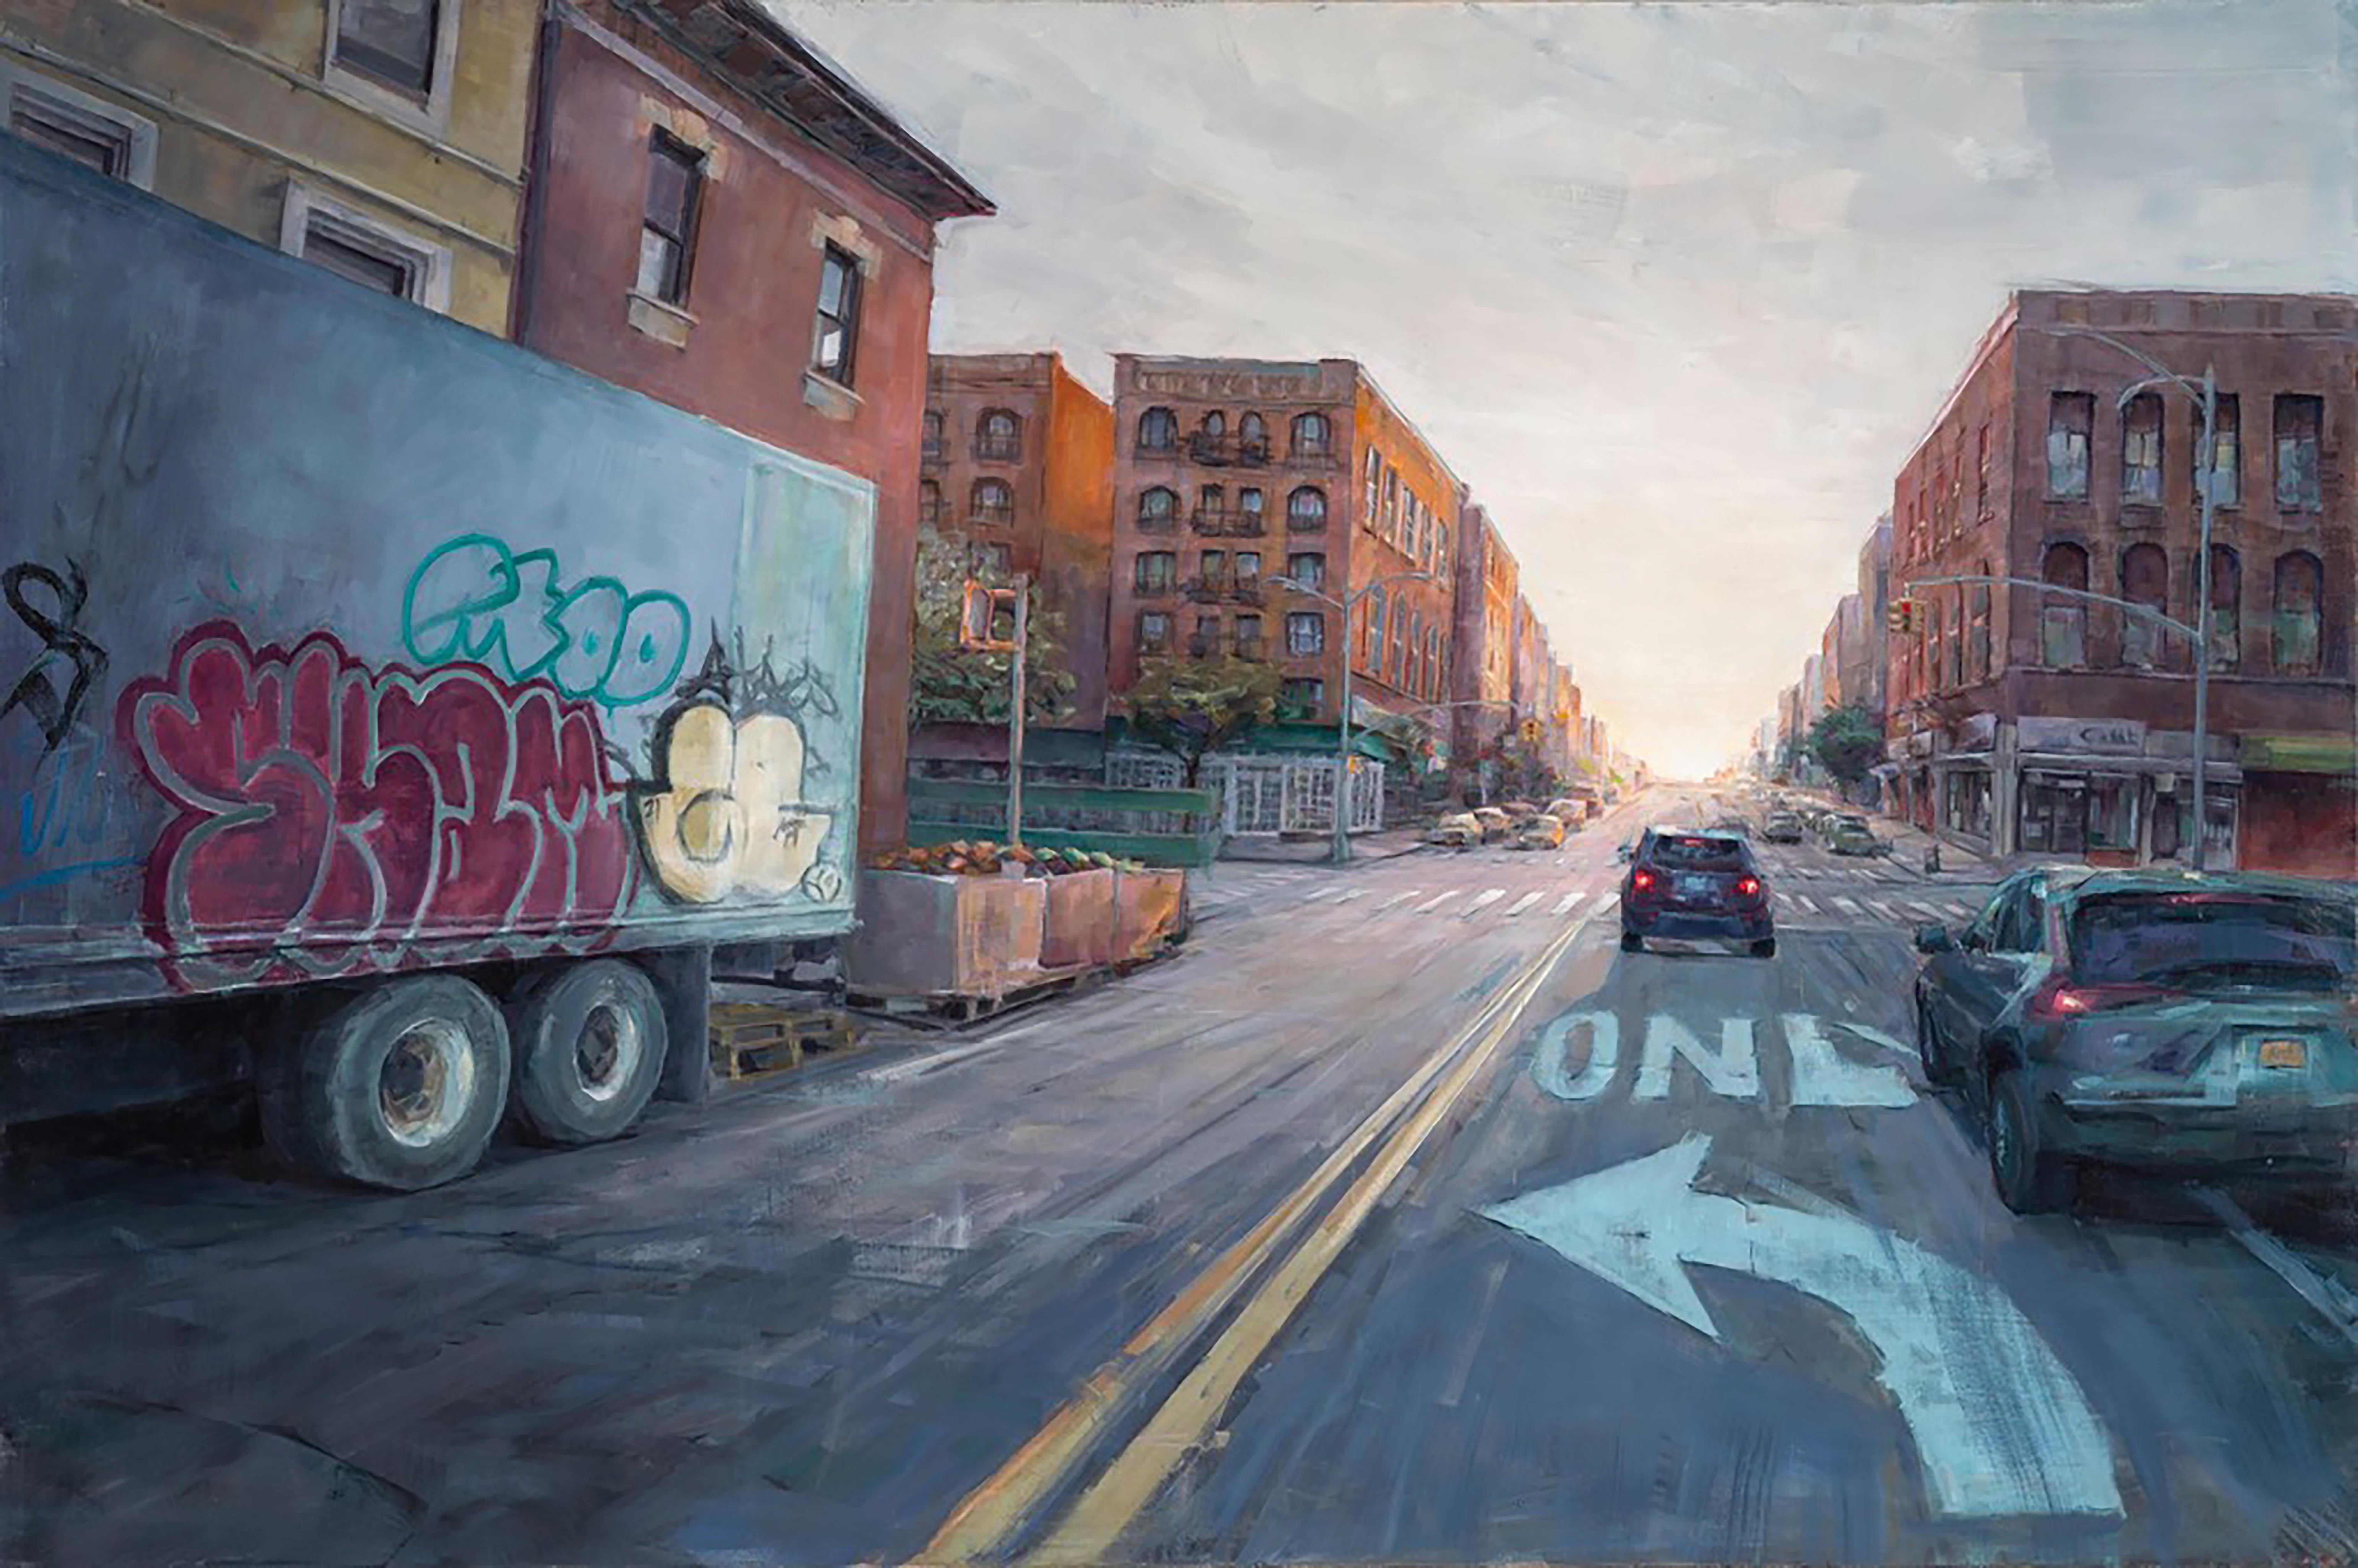 Kathryn Maher Landscape Painting - Intersection with Graffiti